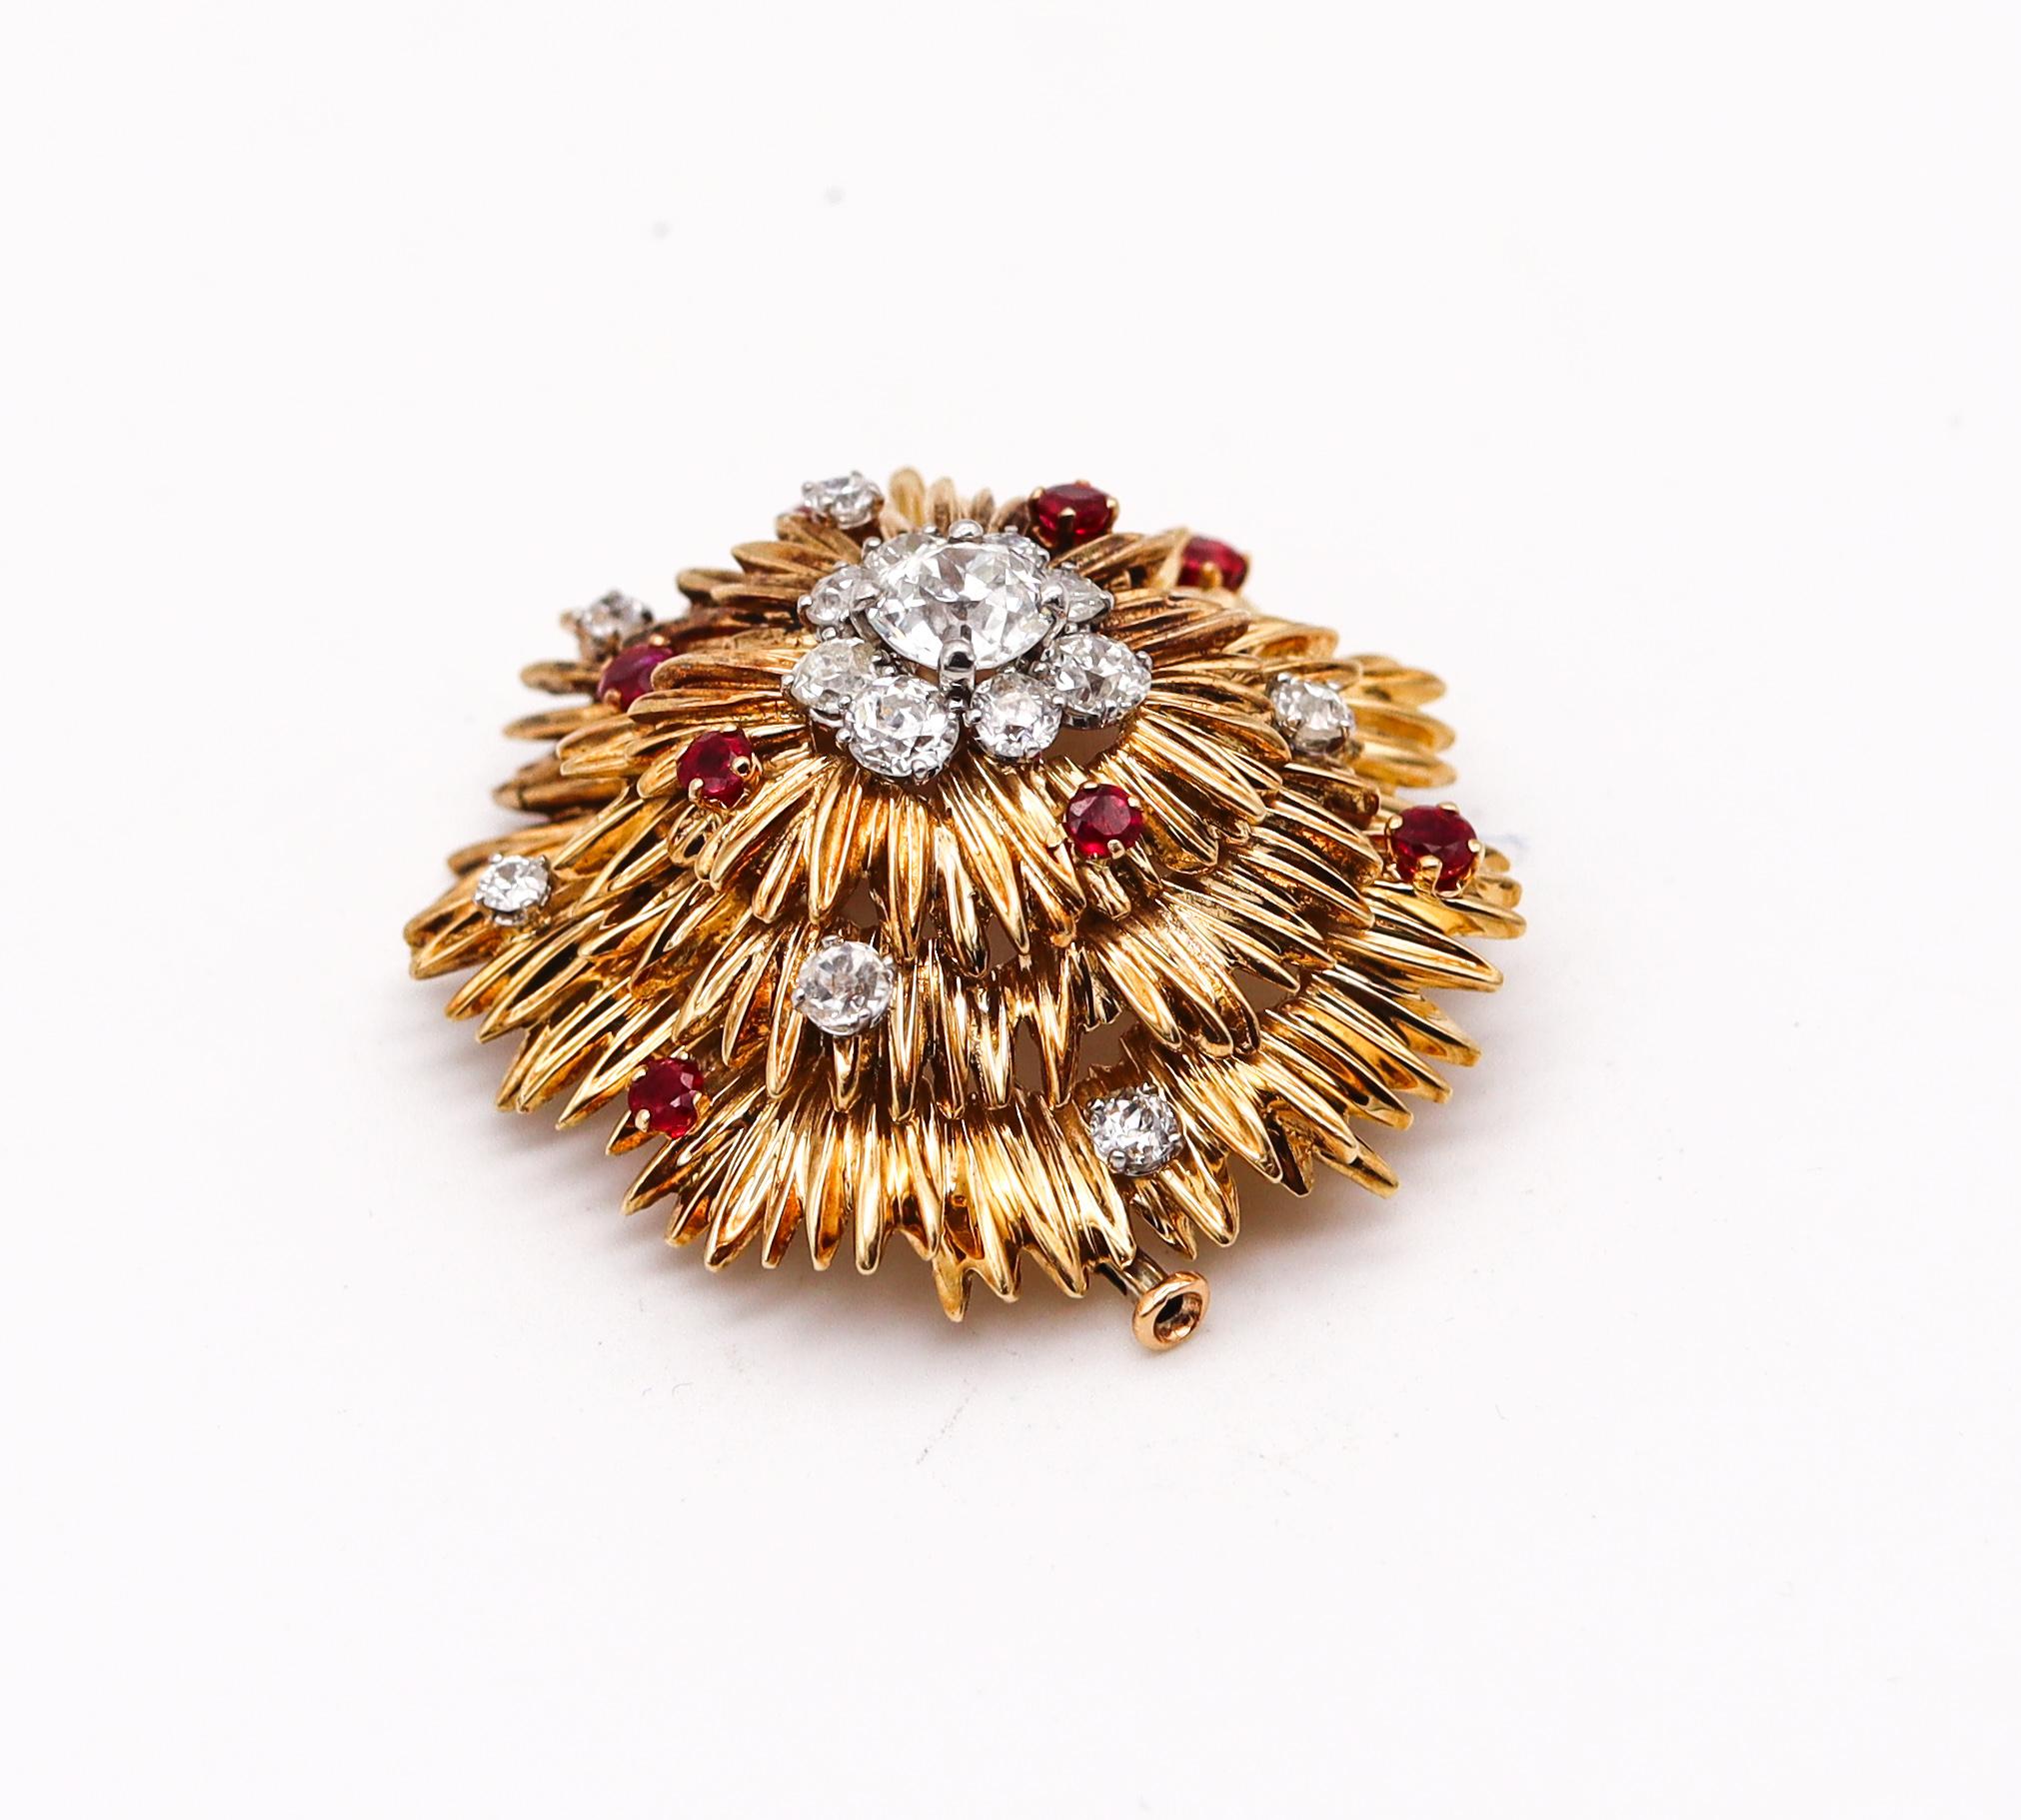 Brooch designed by Van Cleef & Arpels.

Very beautiful piece, created in Paris France by the jewelry house of  Van Cleef & Arpels, back in the 1960. This brooch has been crafted in three dimensions with textured patterns made up of solid yellow gold